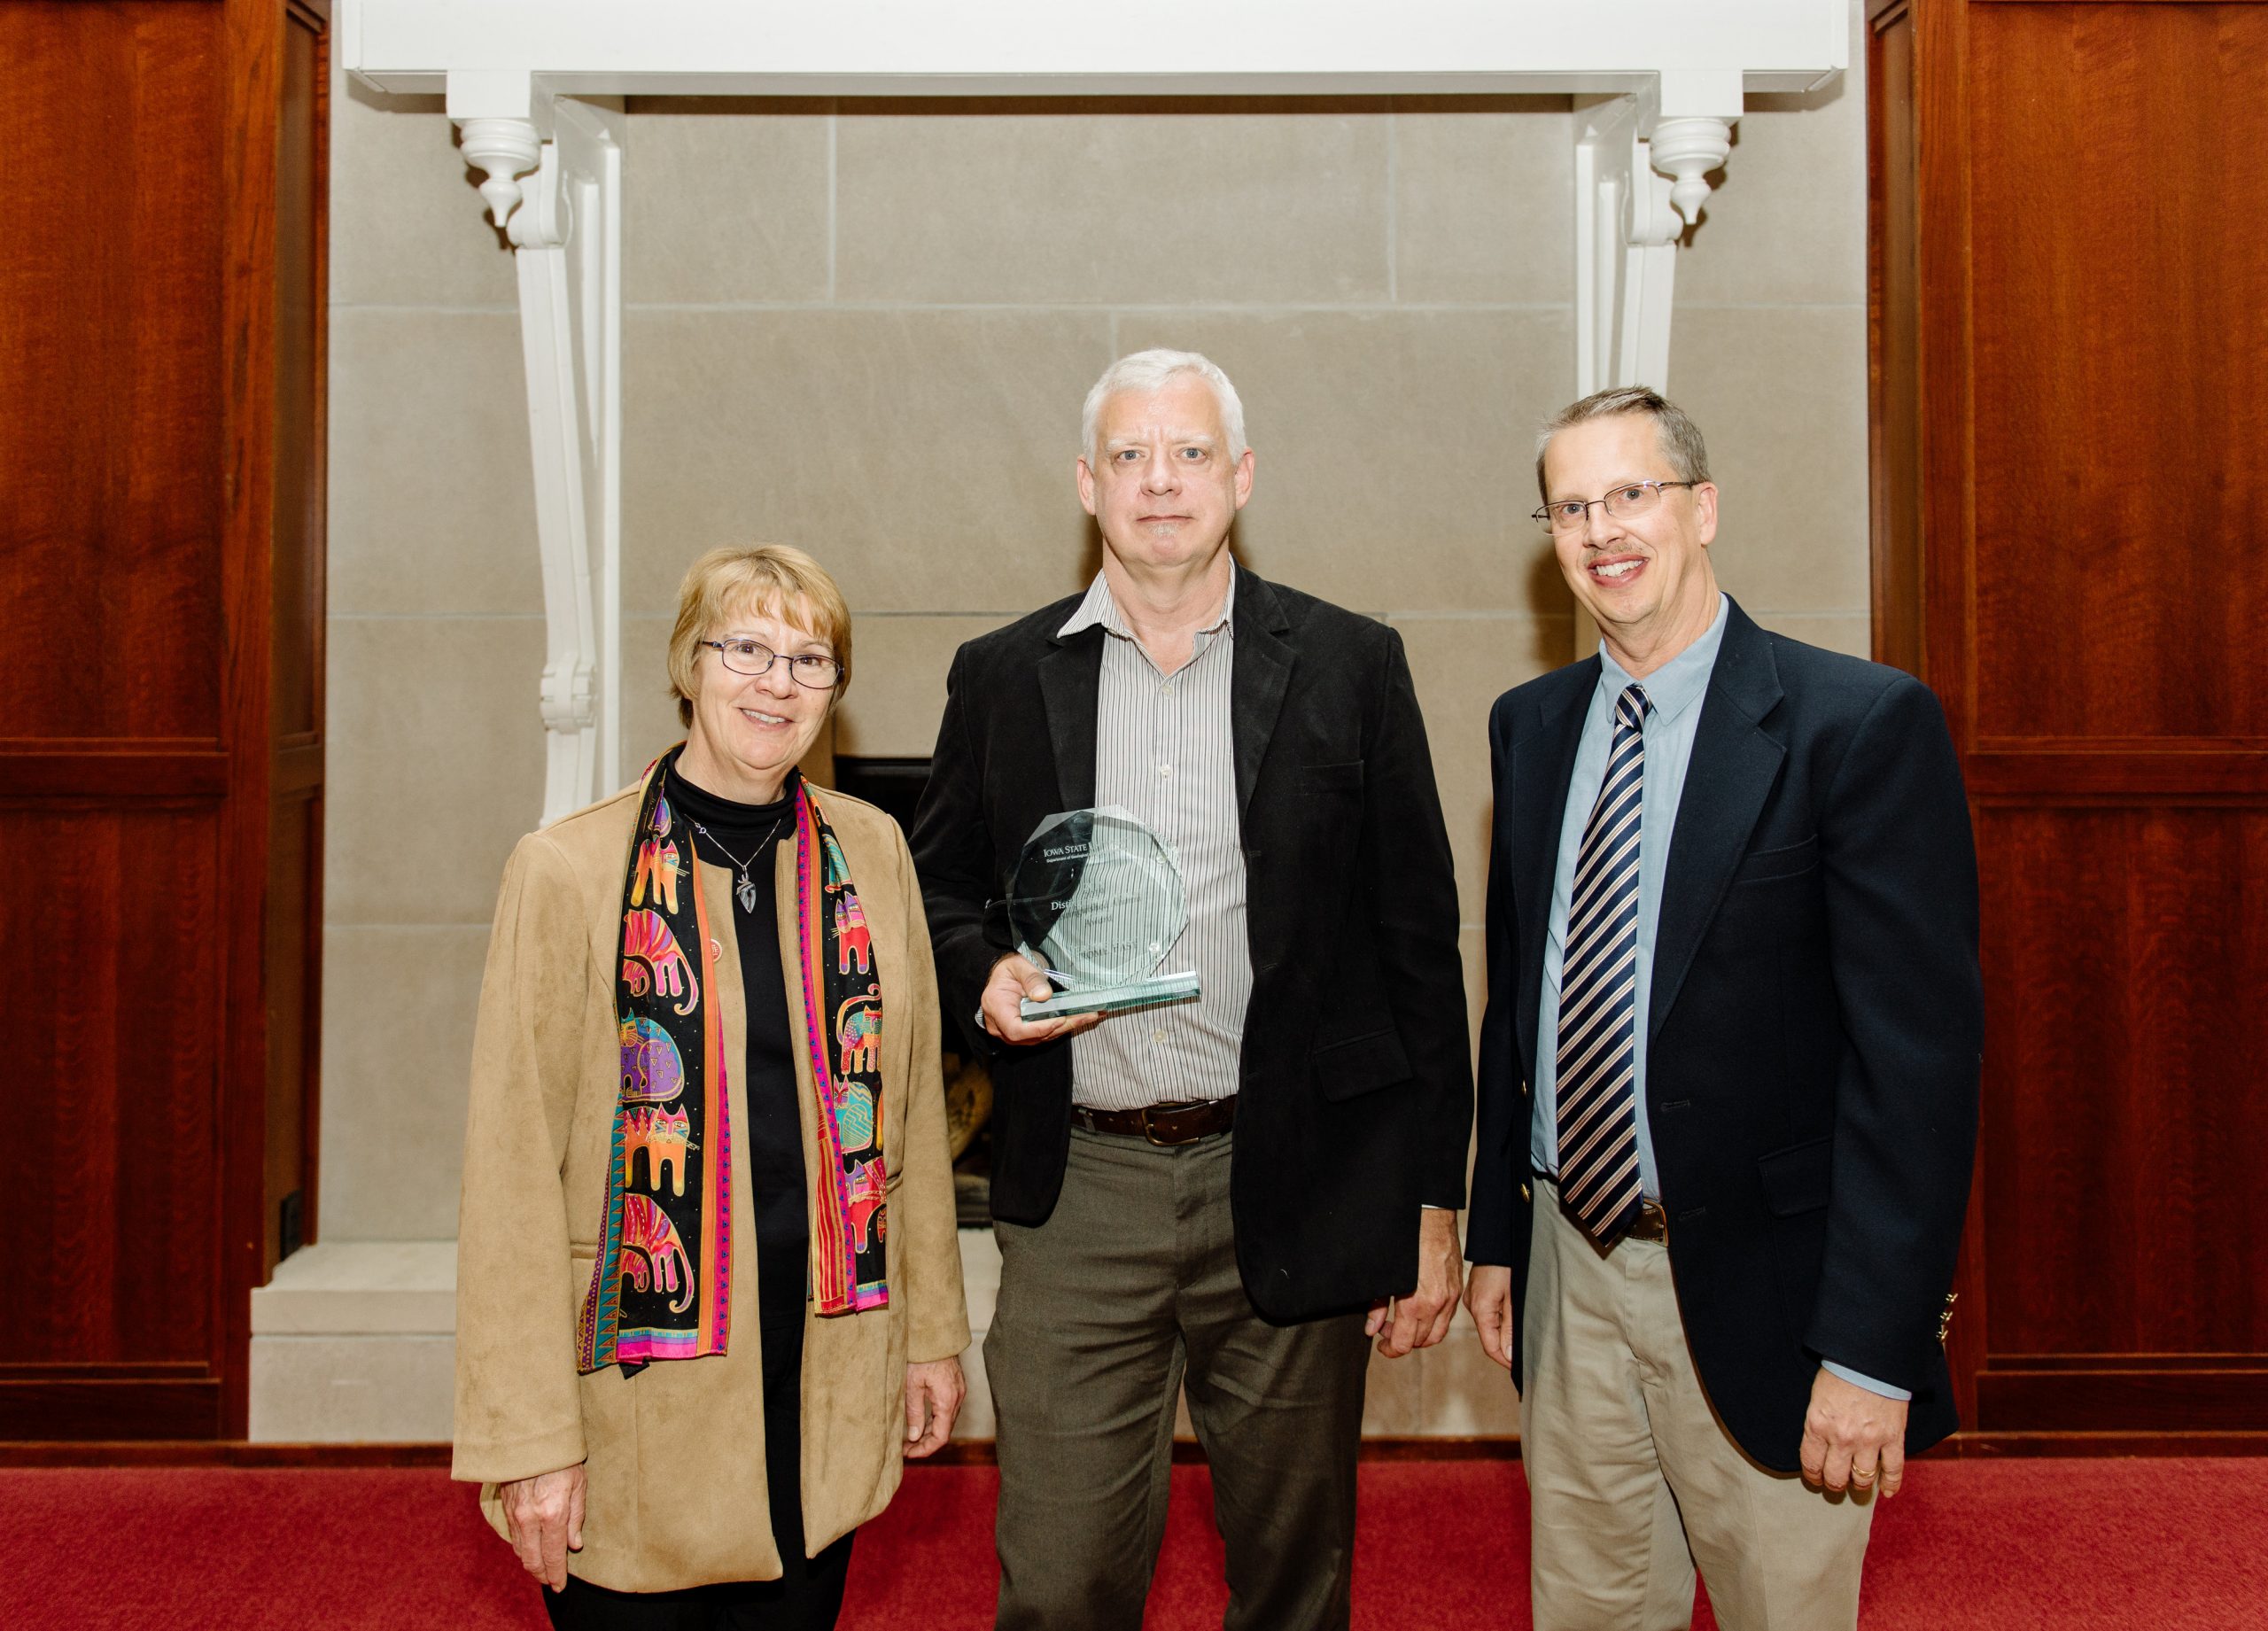 Jerome Fast (center) stands with Dean Schmittmann (left) and Bill Gallus (right) after receiving the GEAT Distinguished Alumni Award